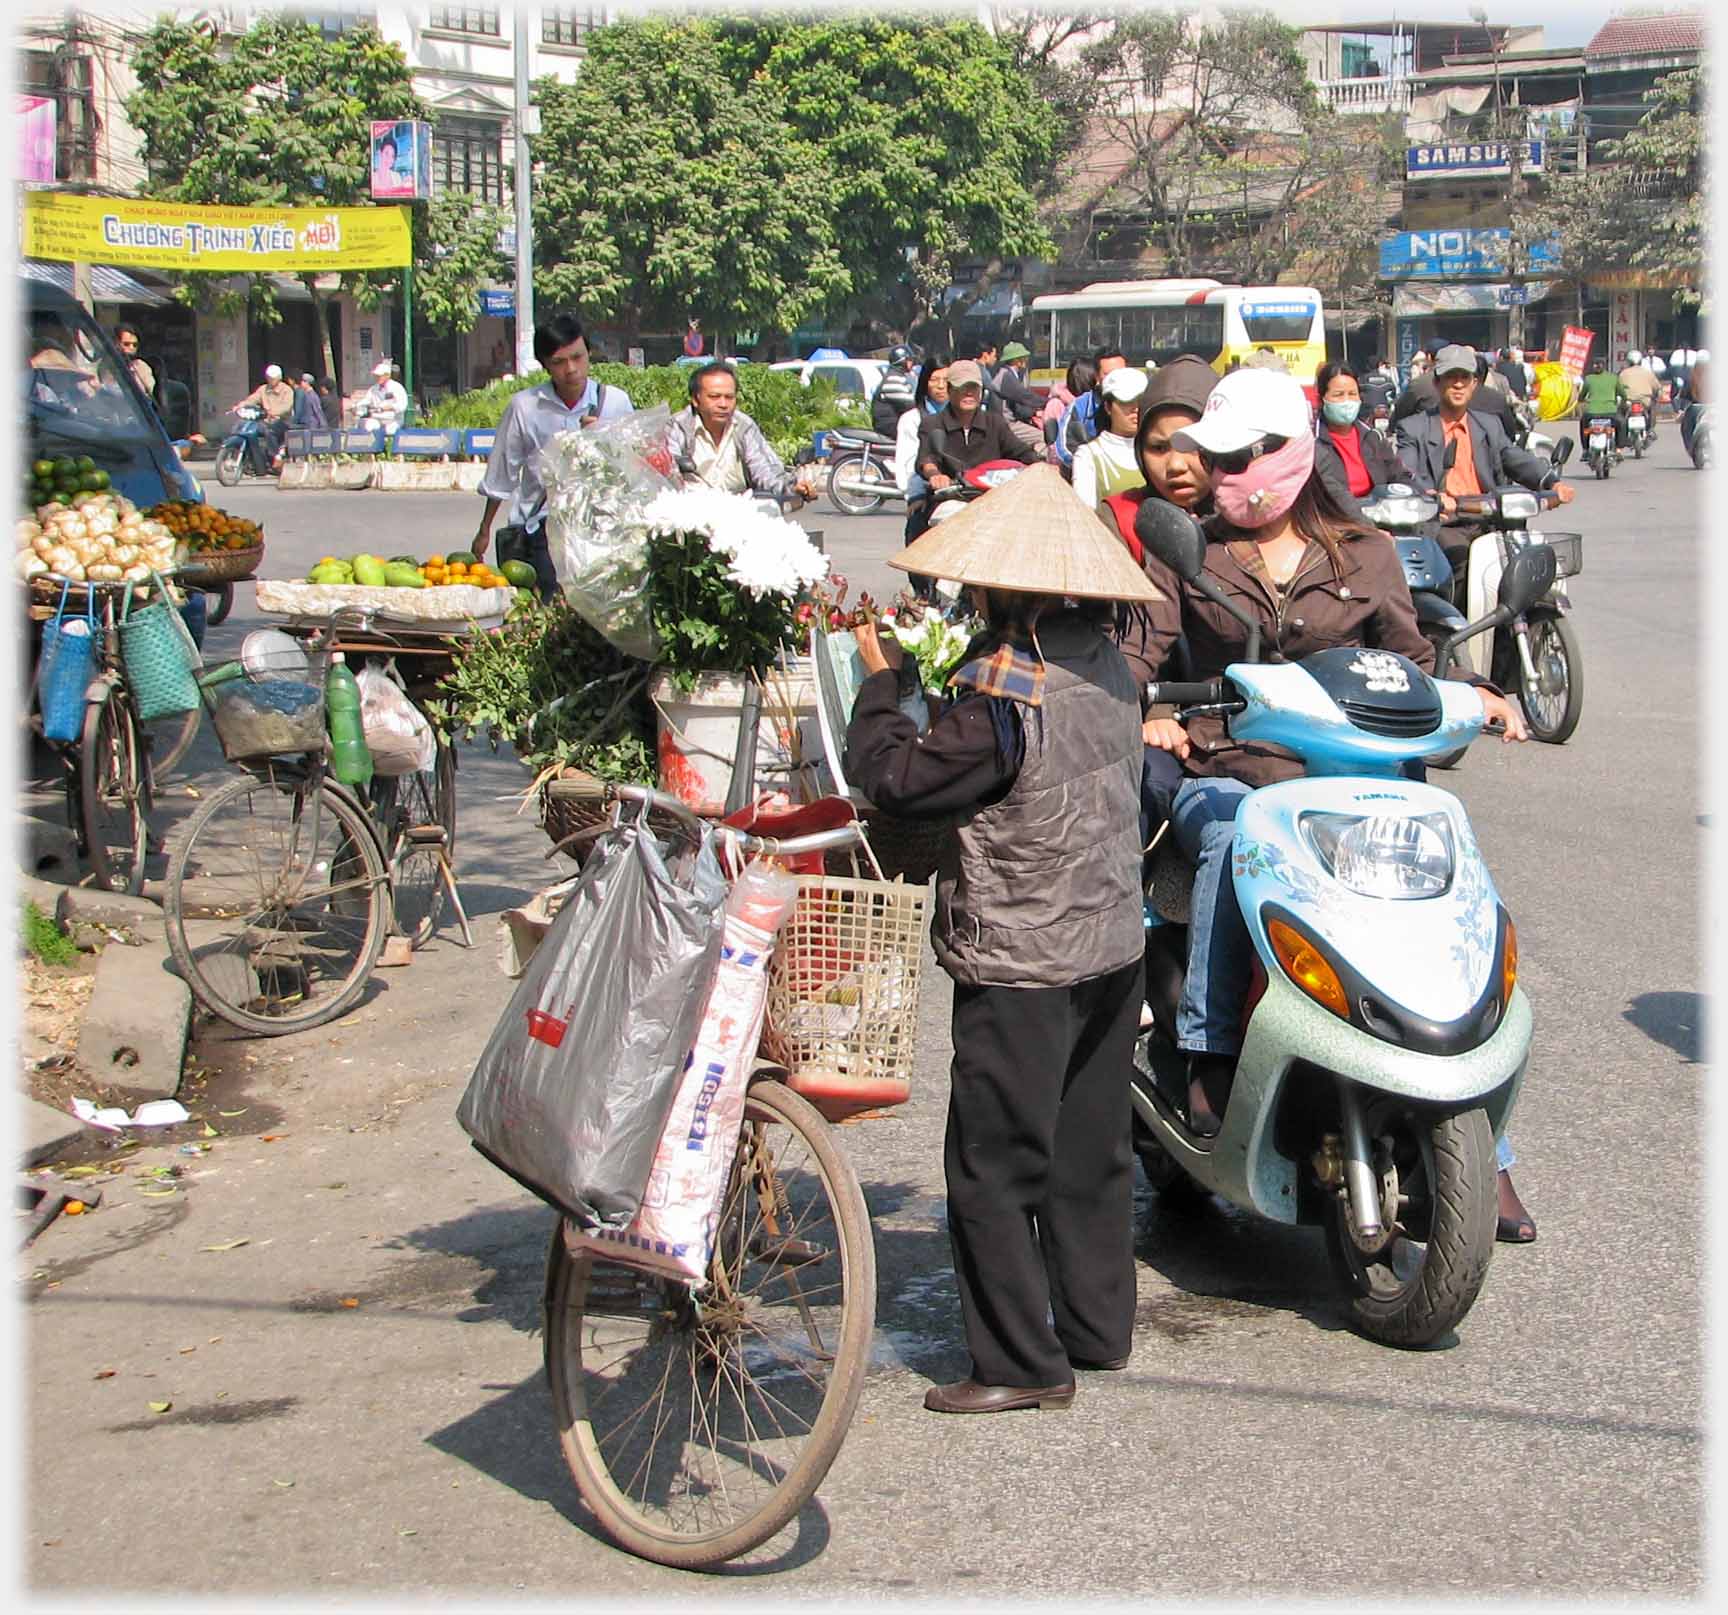 Woman by her bike on which are buckets of flowers, woman on scooter stopping to look.